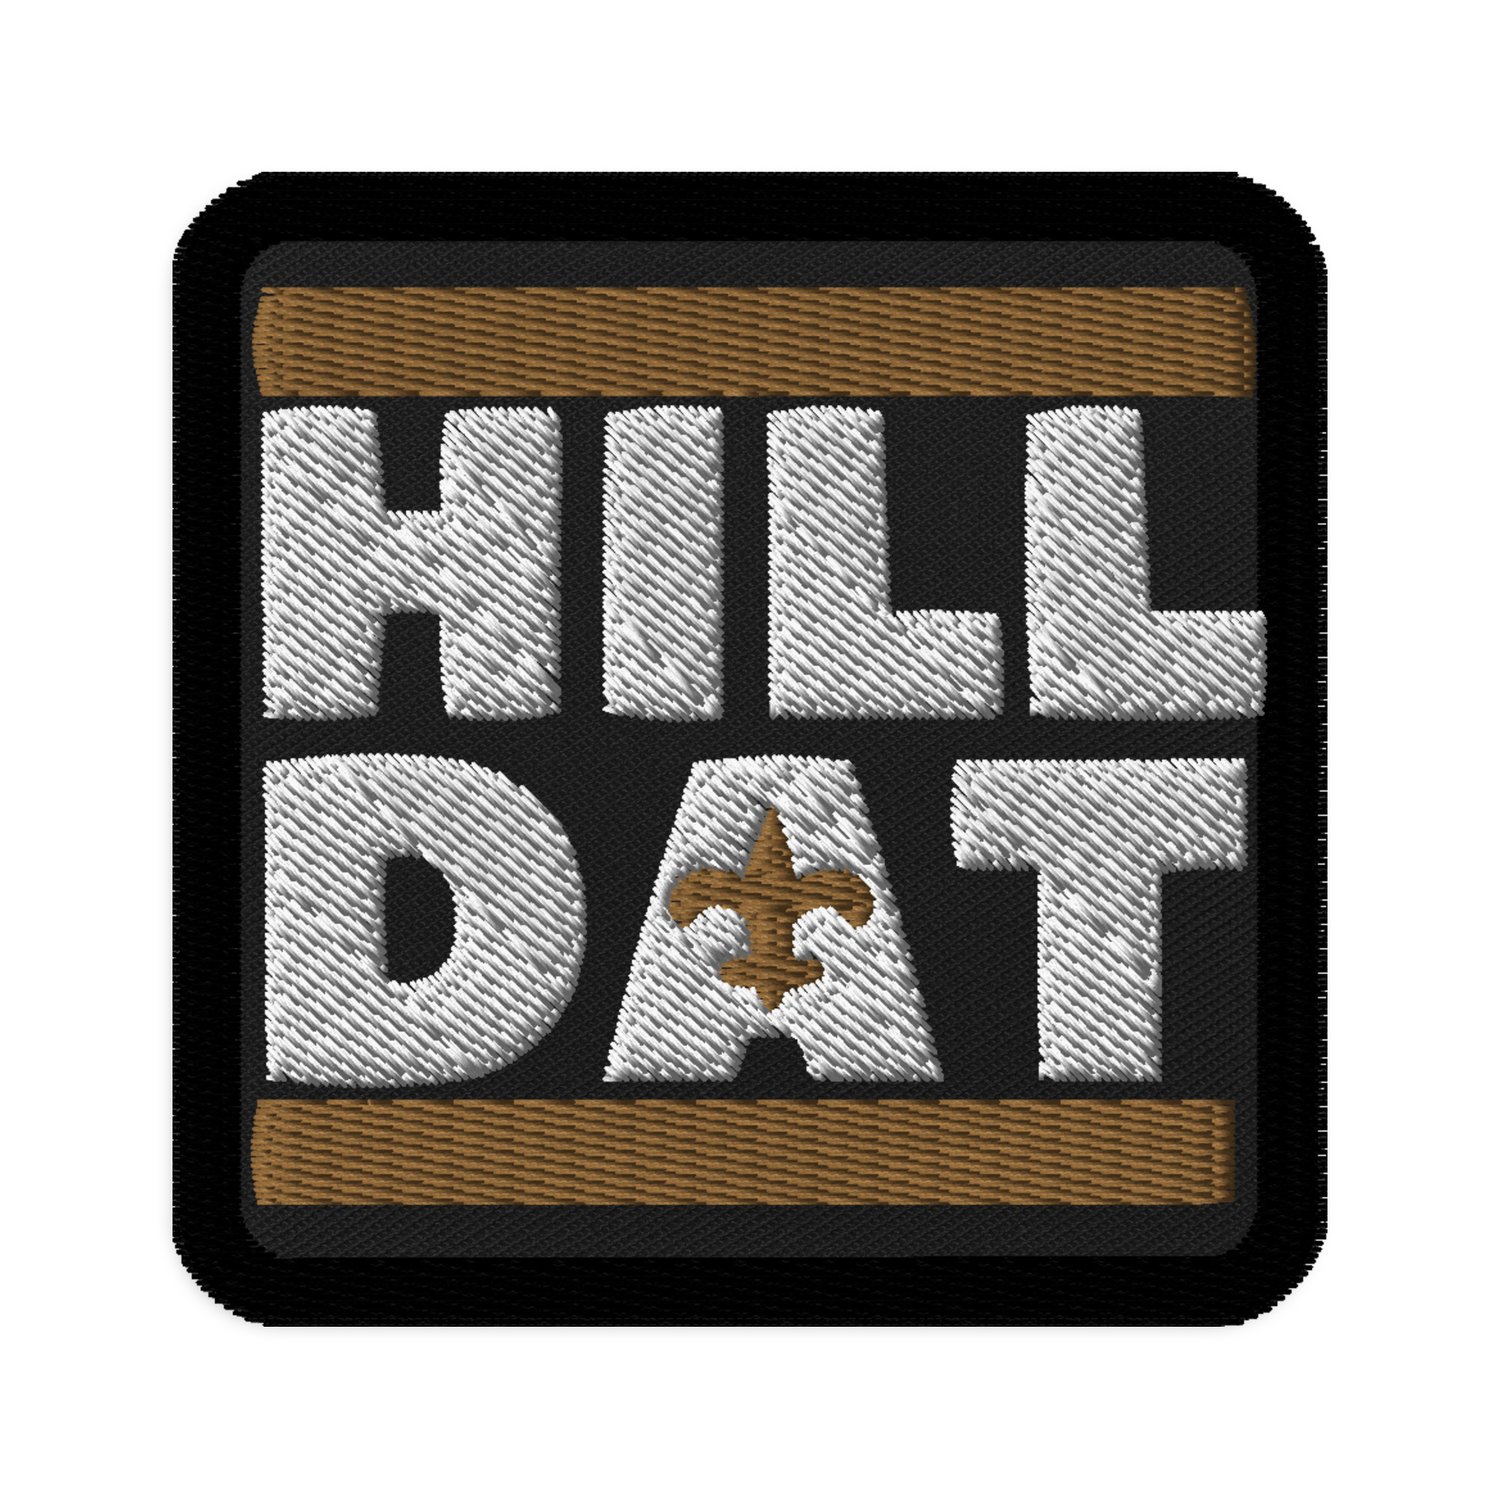 Image of “HILL DAT” Embroidered Patches - Square 3″×3″